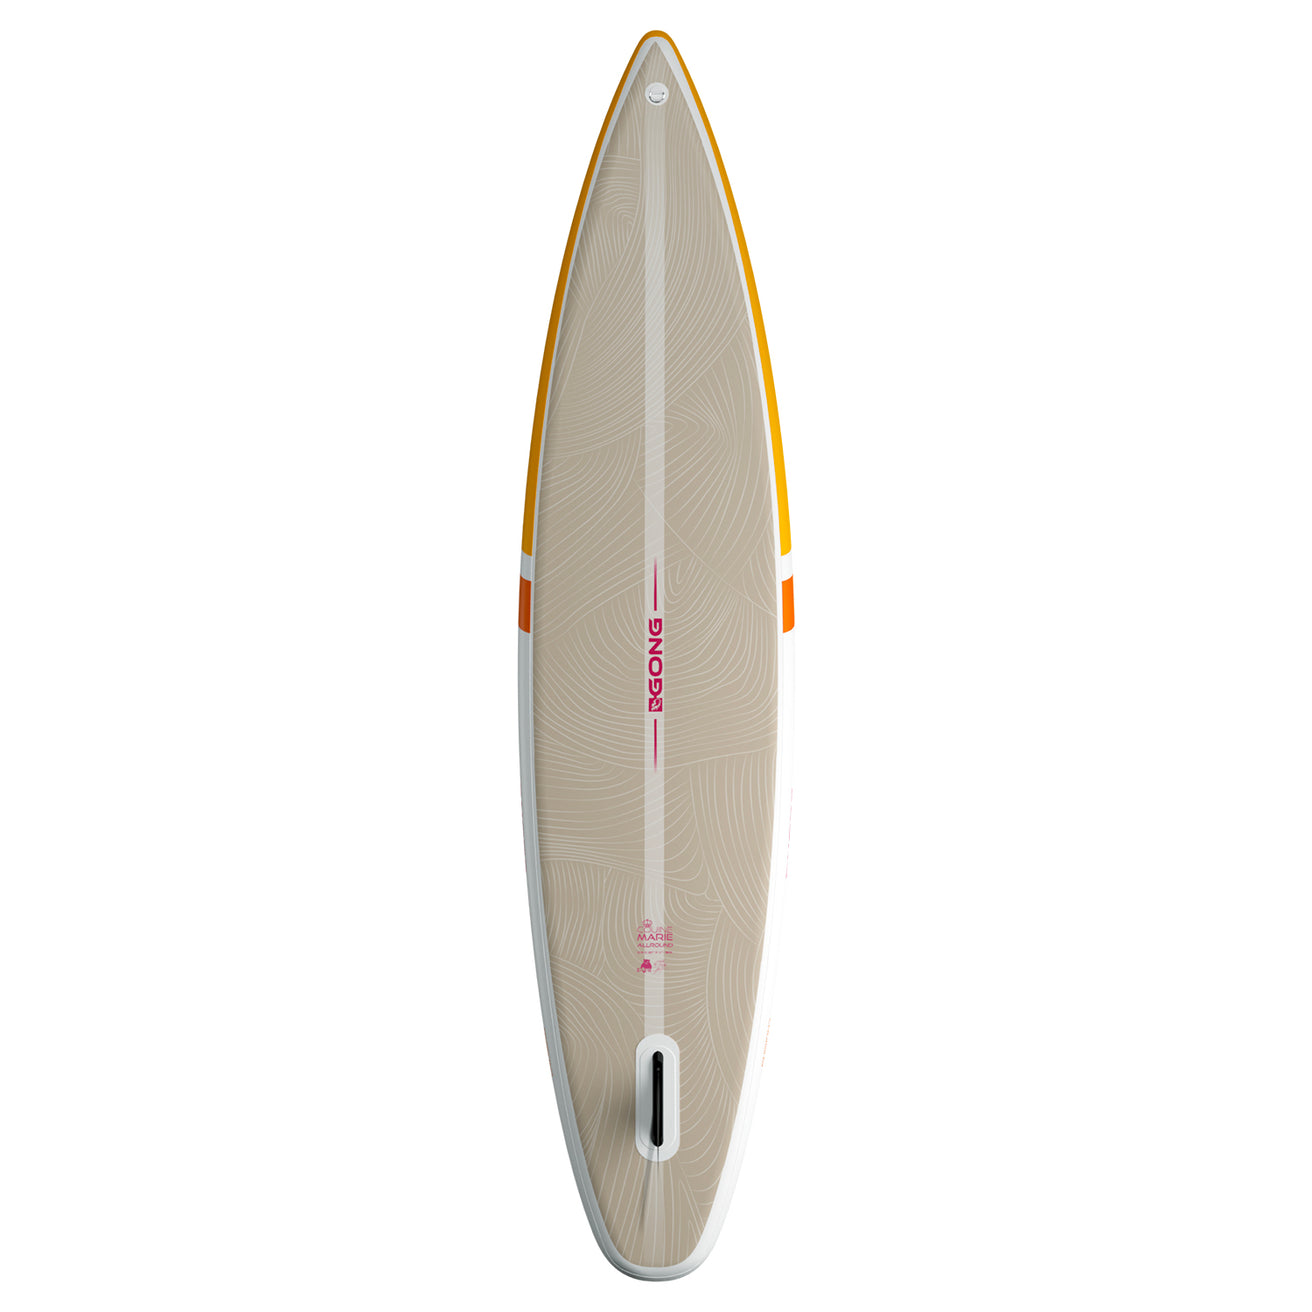 GONG | SUP Inflatable Couine Marie Cruising Limited Edition California